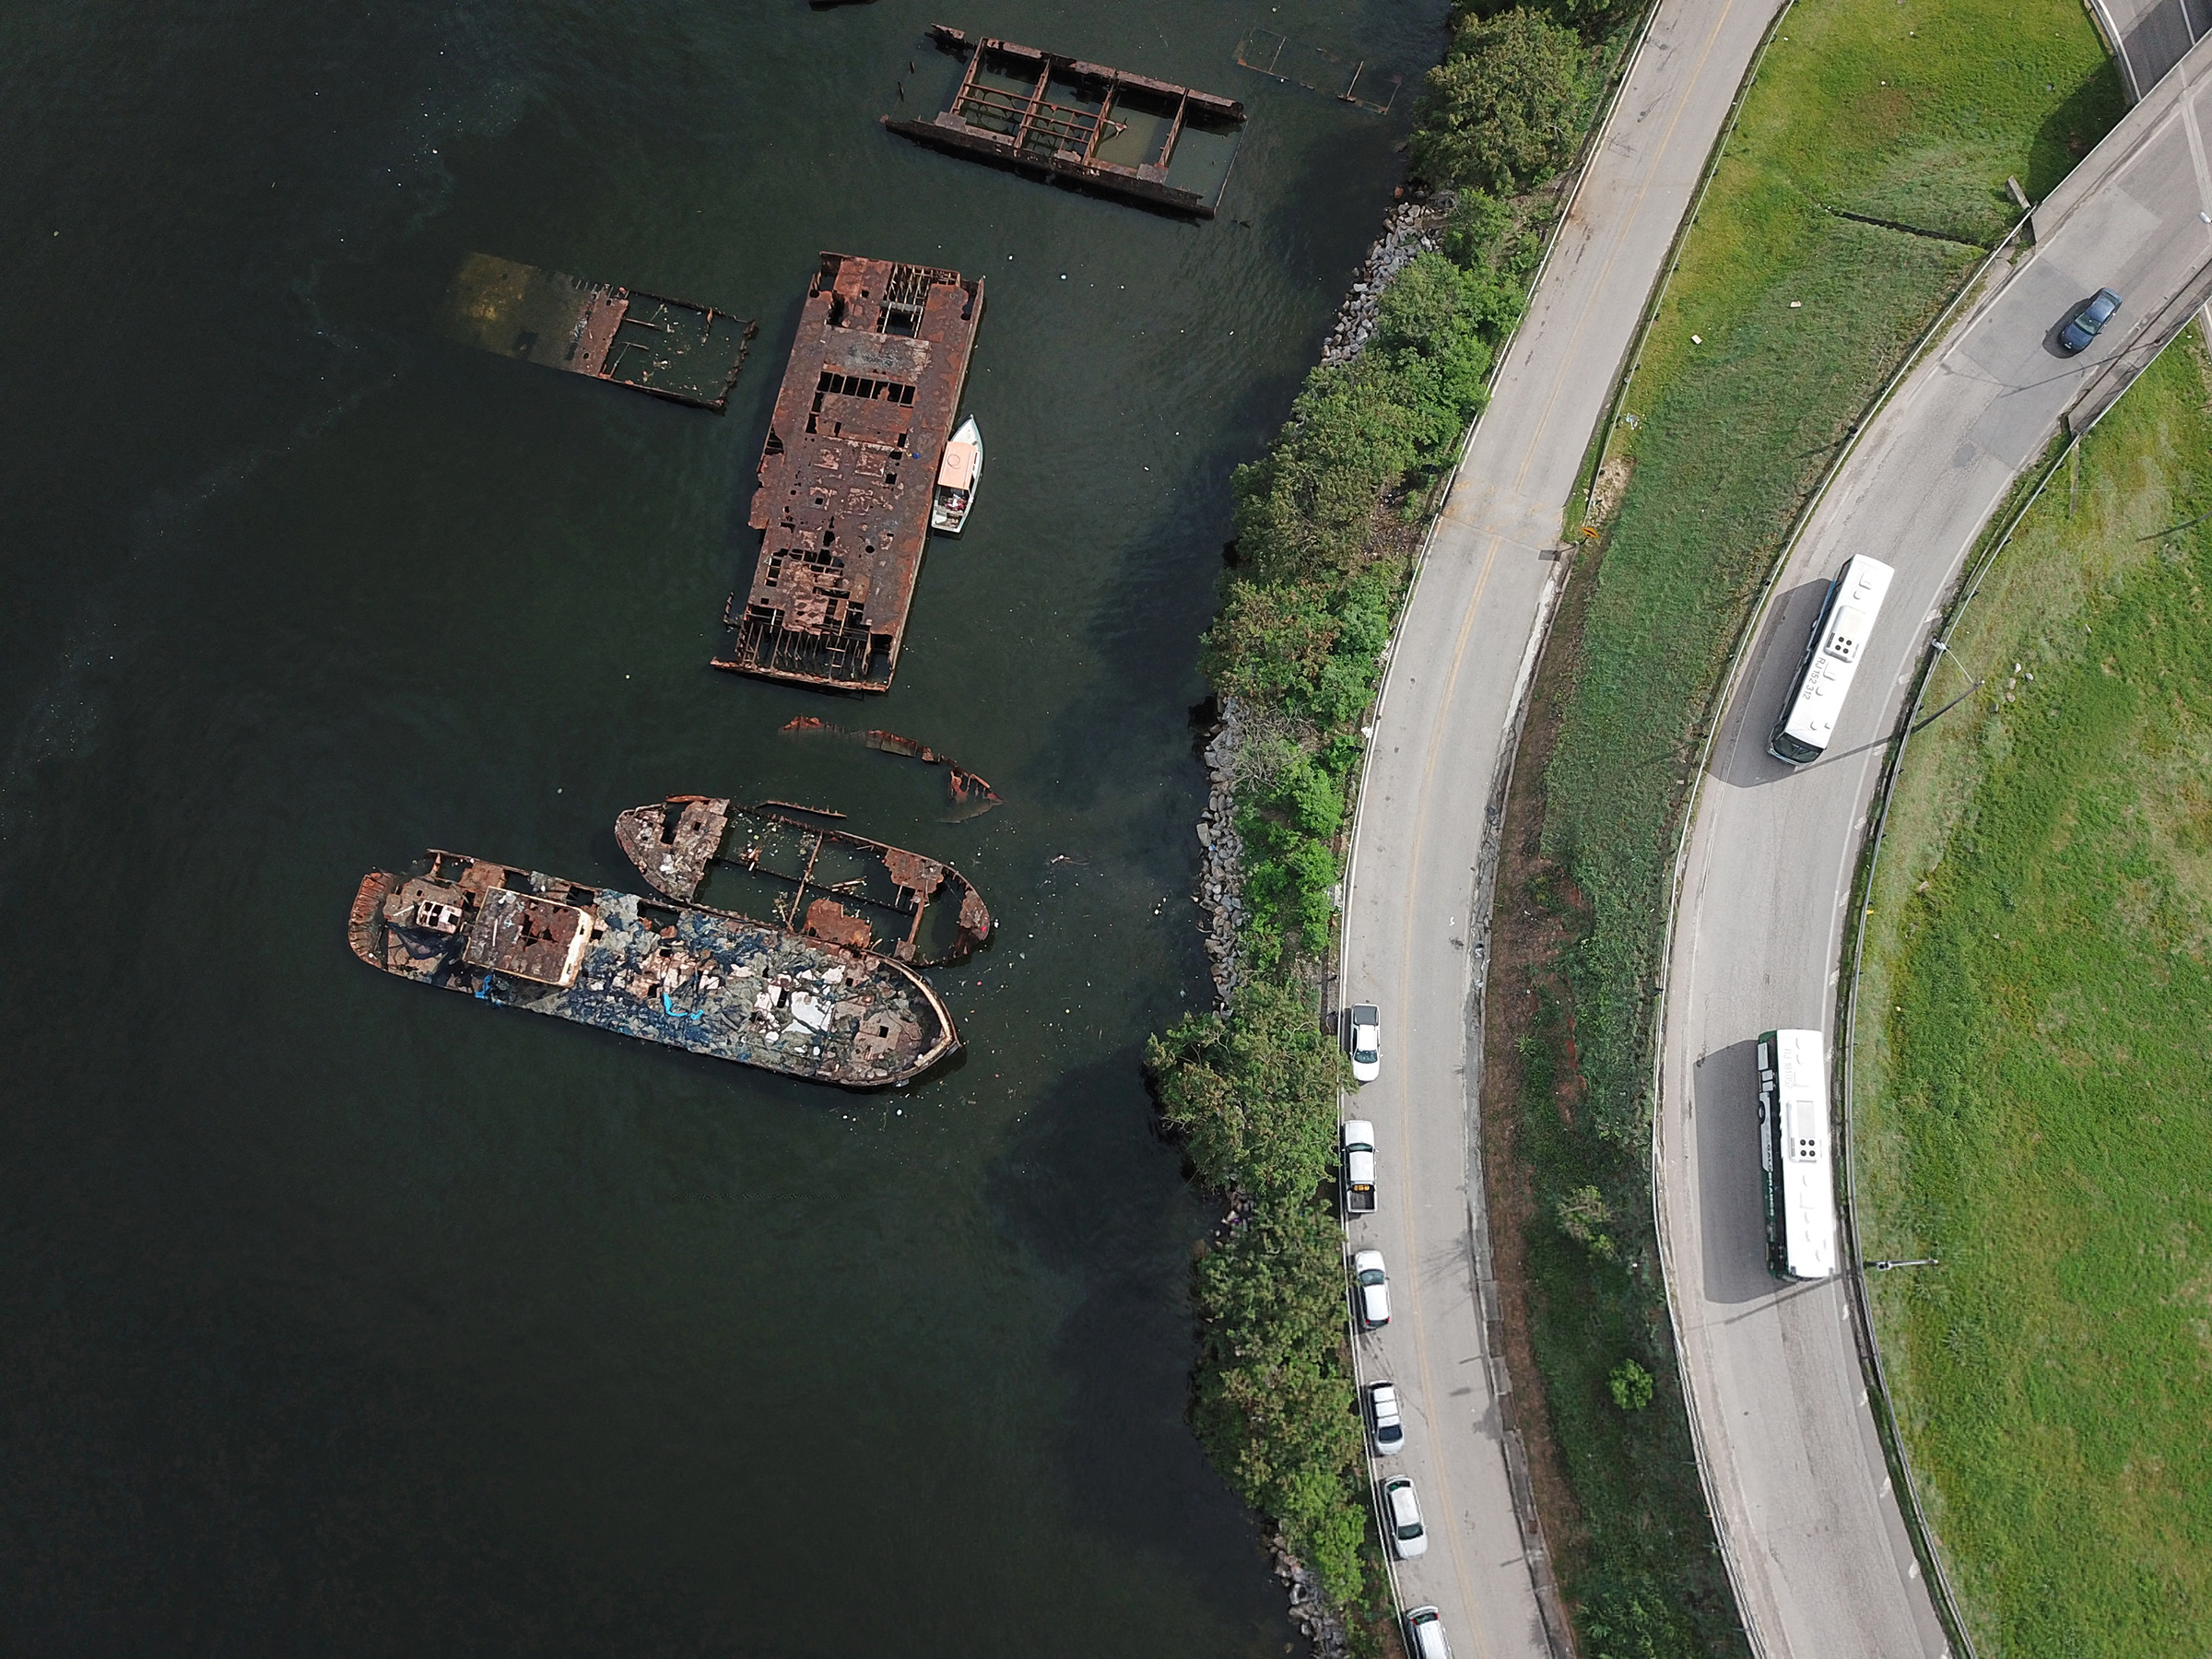 Remains of abandoned ships are seen on the shores of the Guanabara Bay in Niteroi, Brazil, on Dec. 28, 2022. (Pilar Olivares—Reuters)